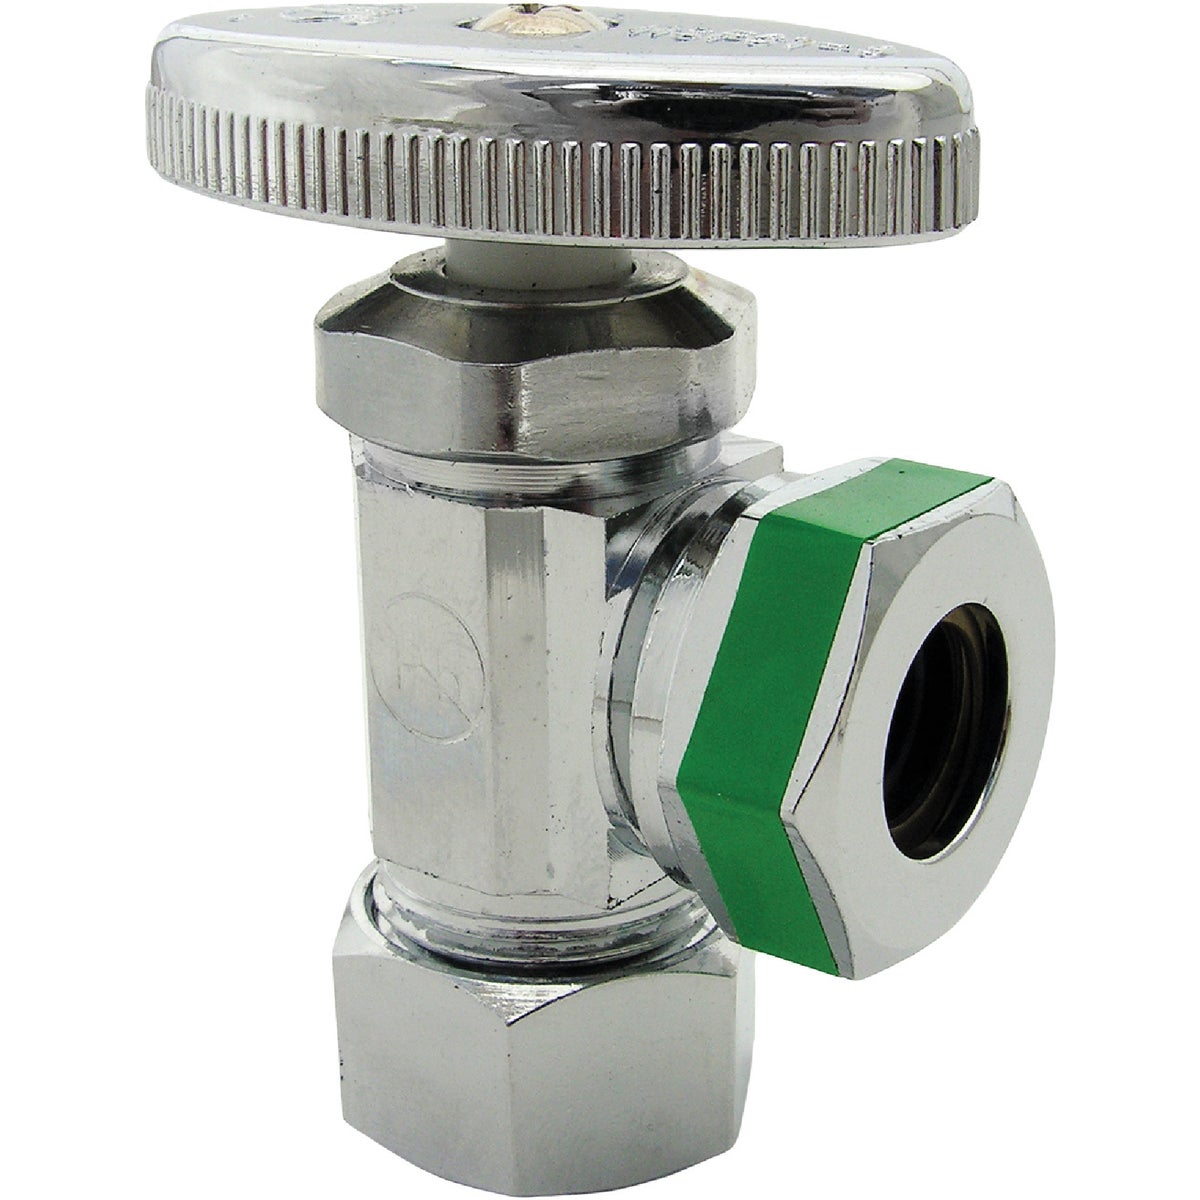 Lasco 5/8 In. Comp Inlet x 1/2 In. IP S-J Outlet Multi-Turn Style Angle Valve